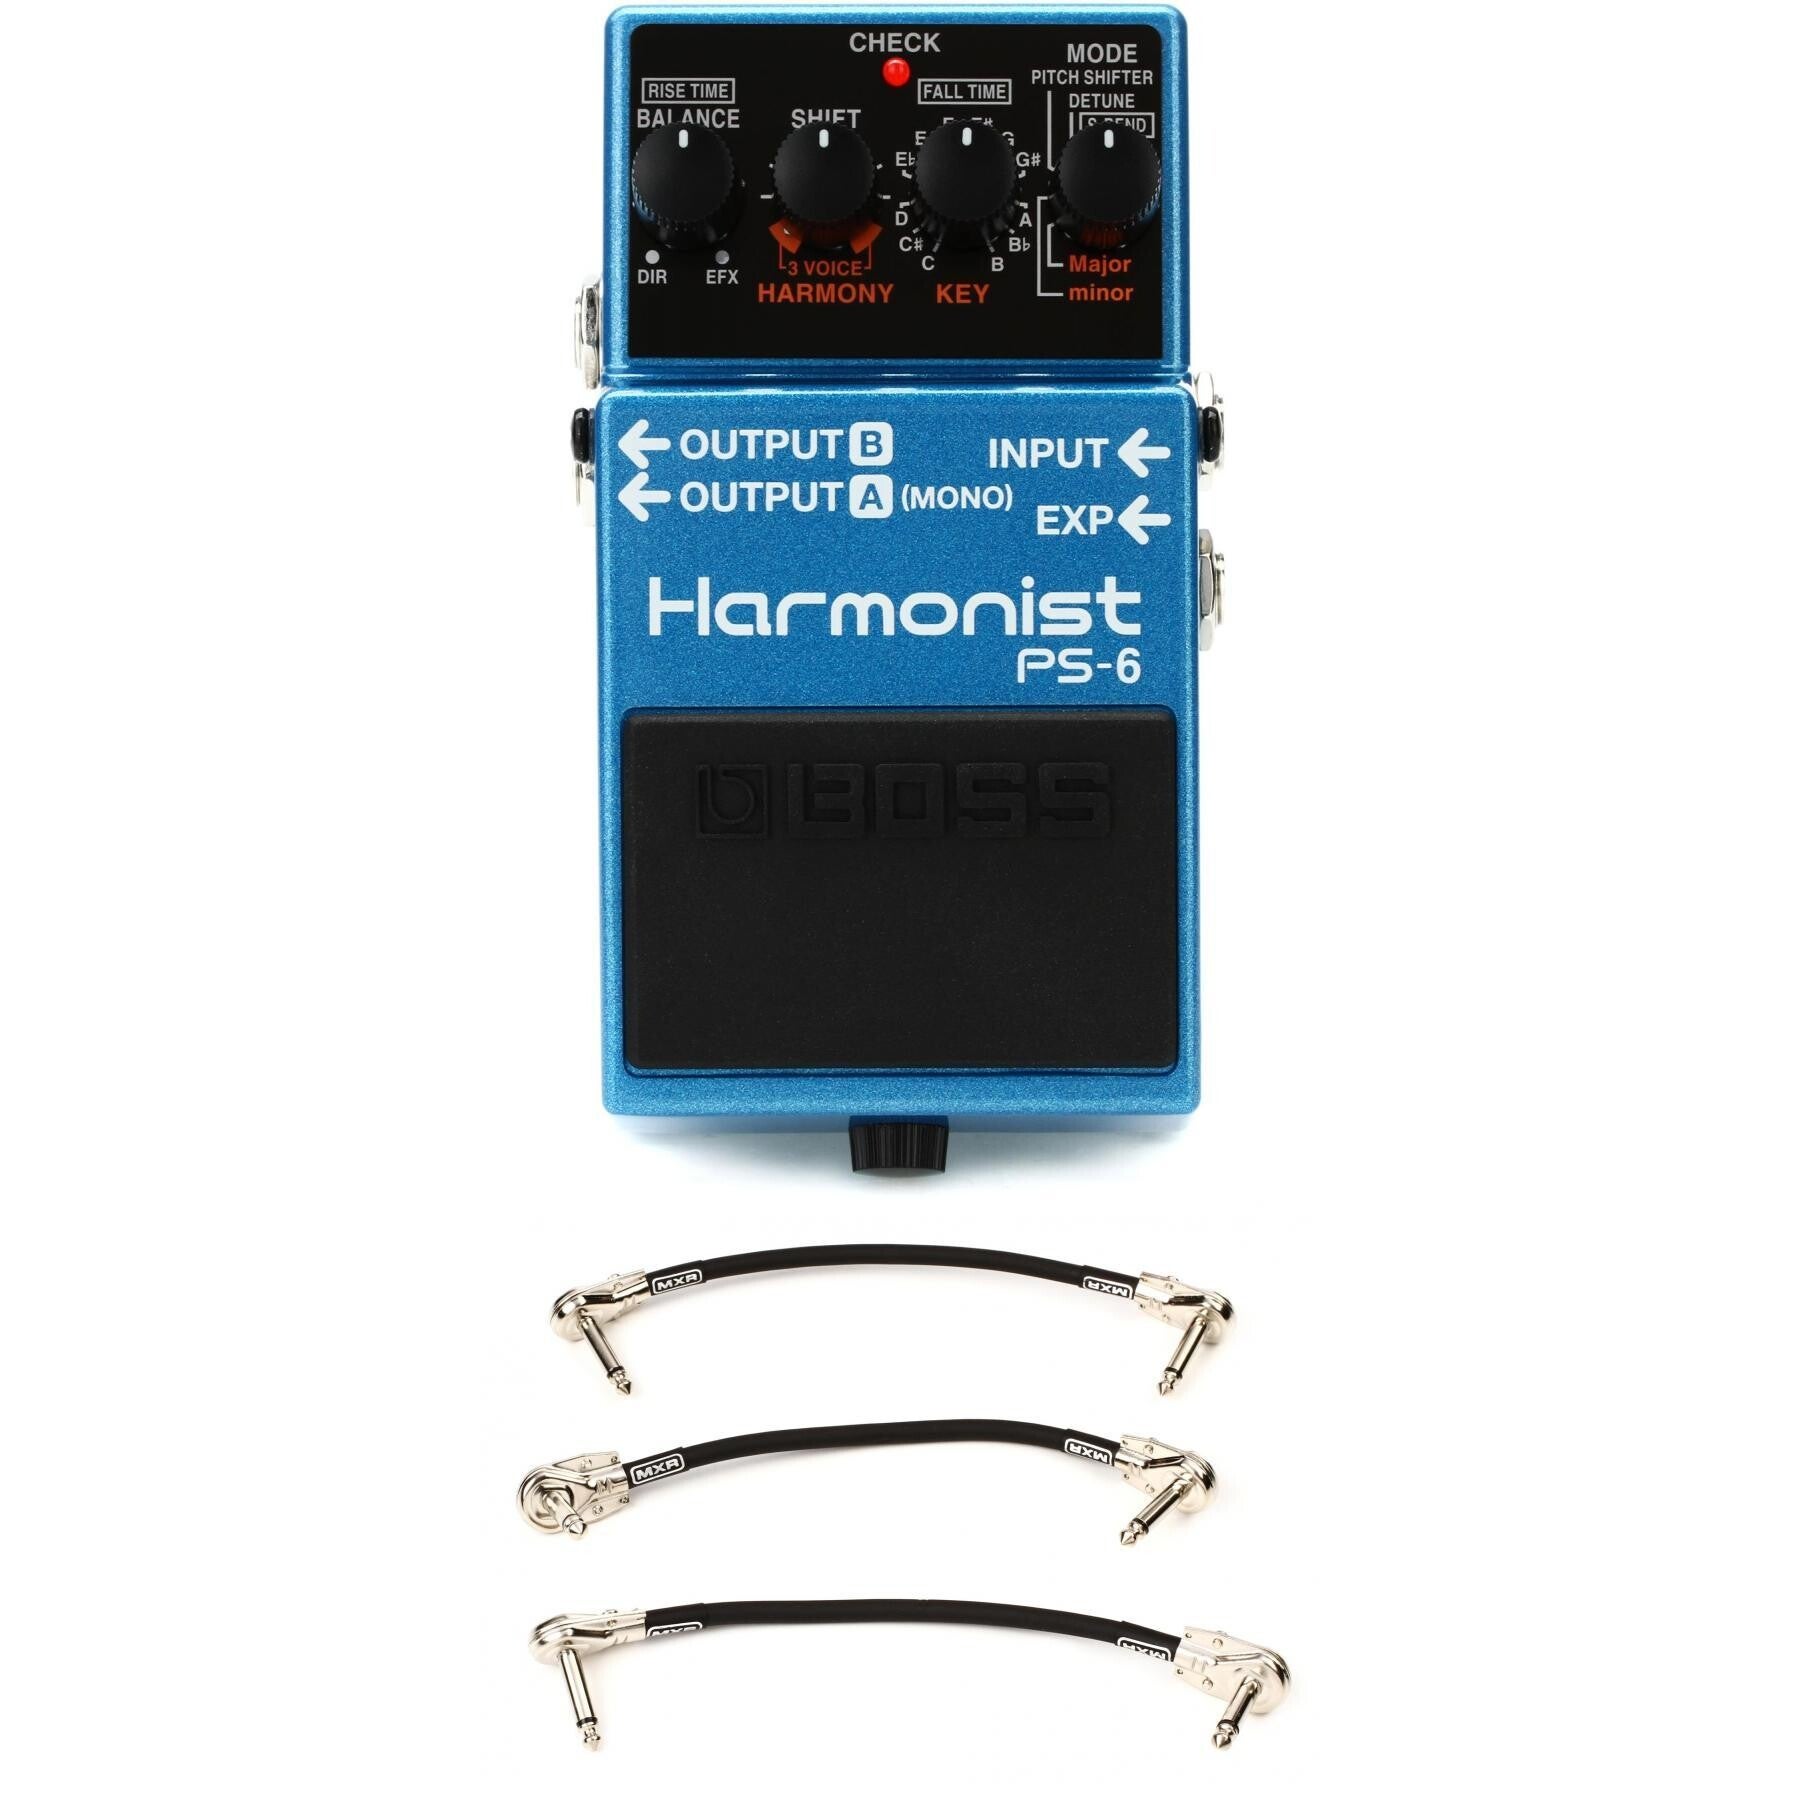 Boss PS-6 Harmonist Pedal with 3 Patch Cables